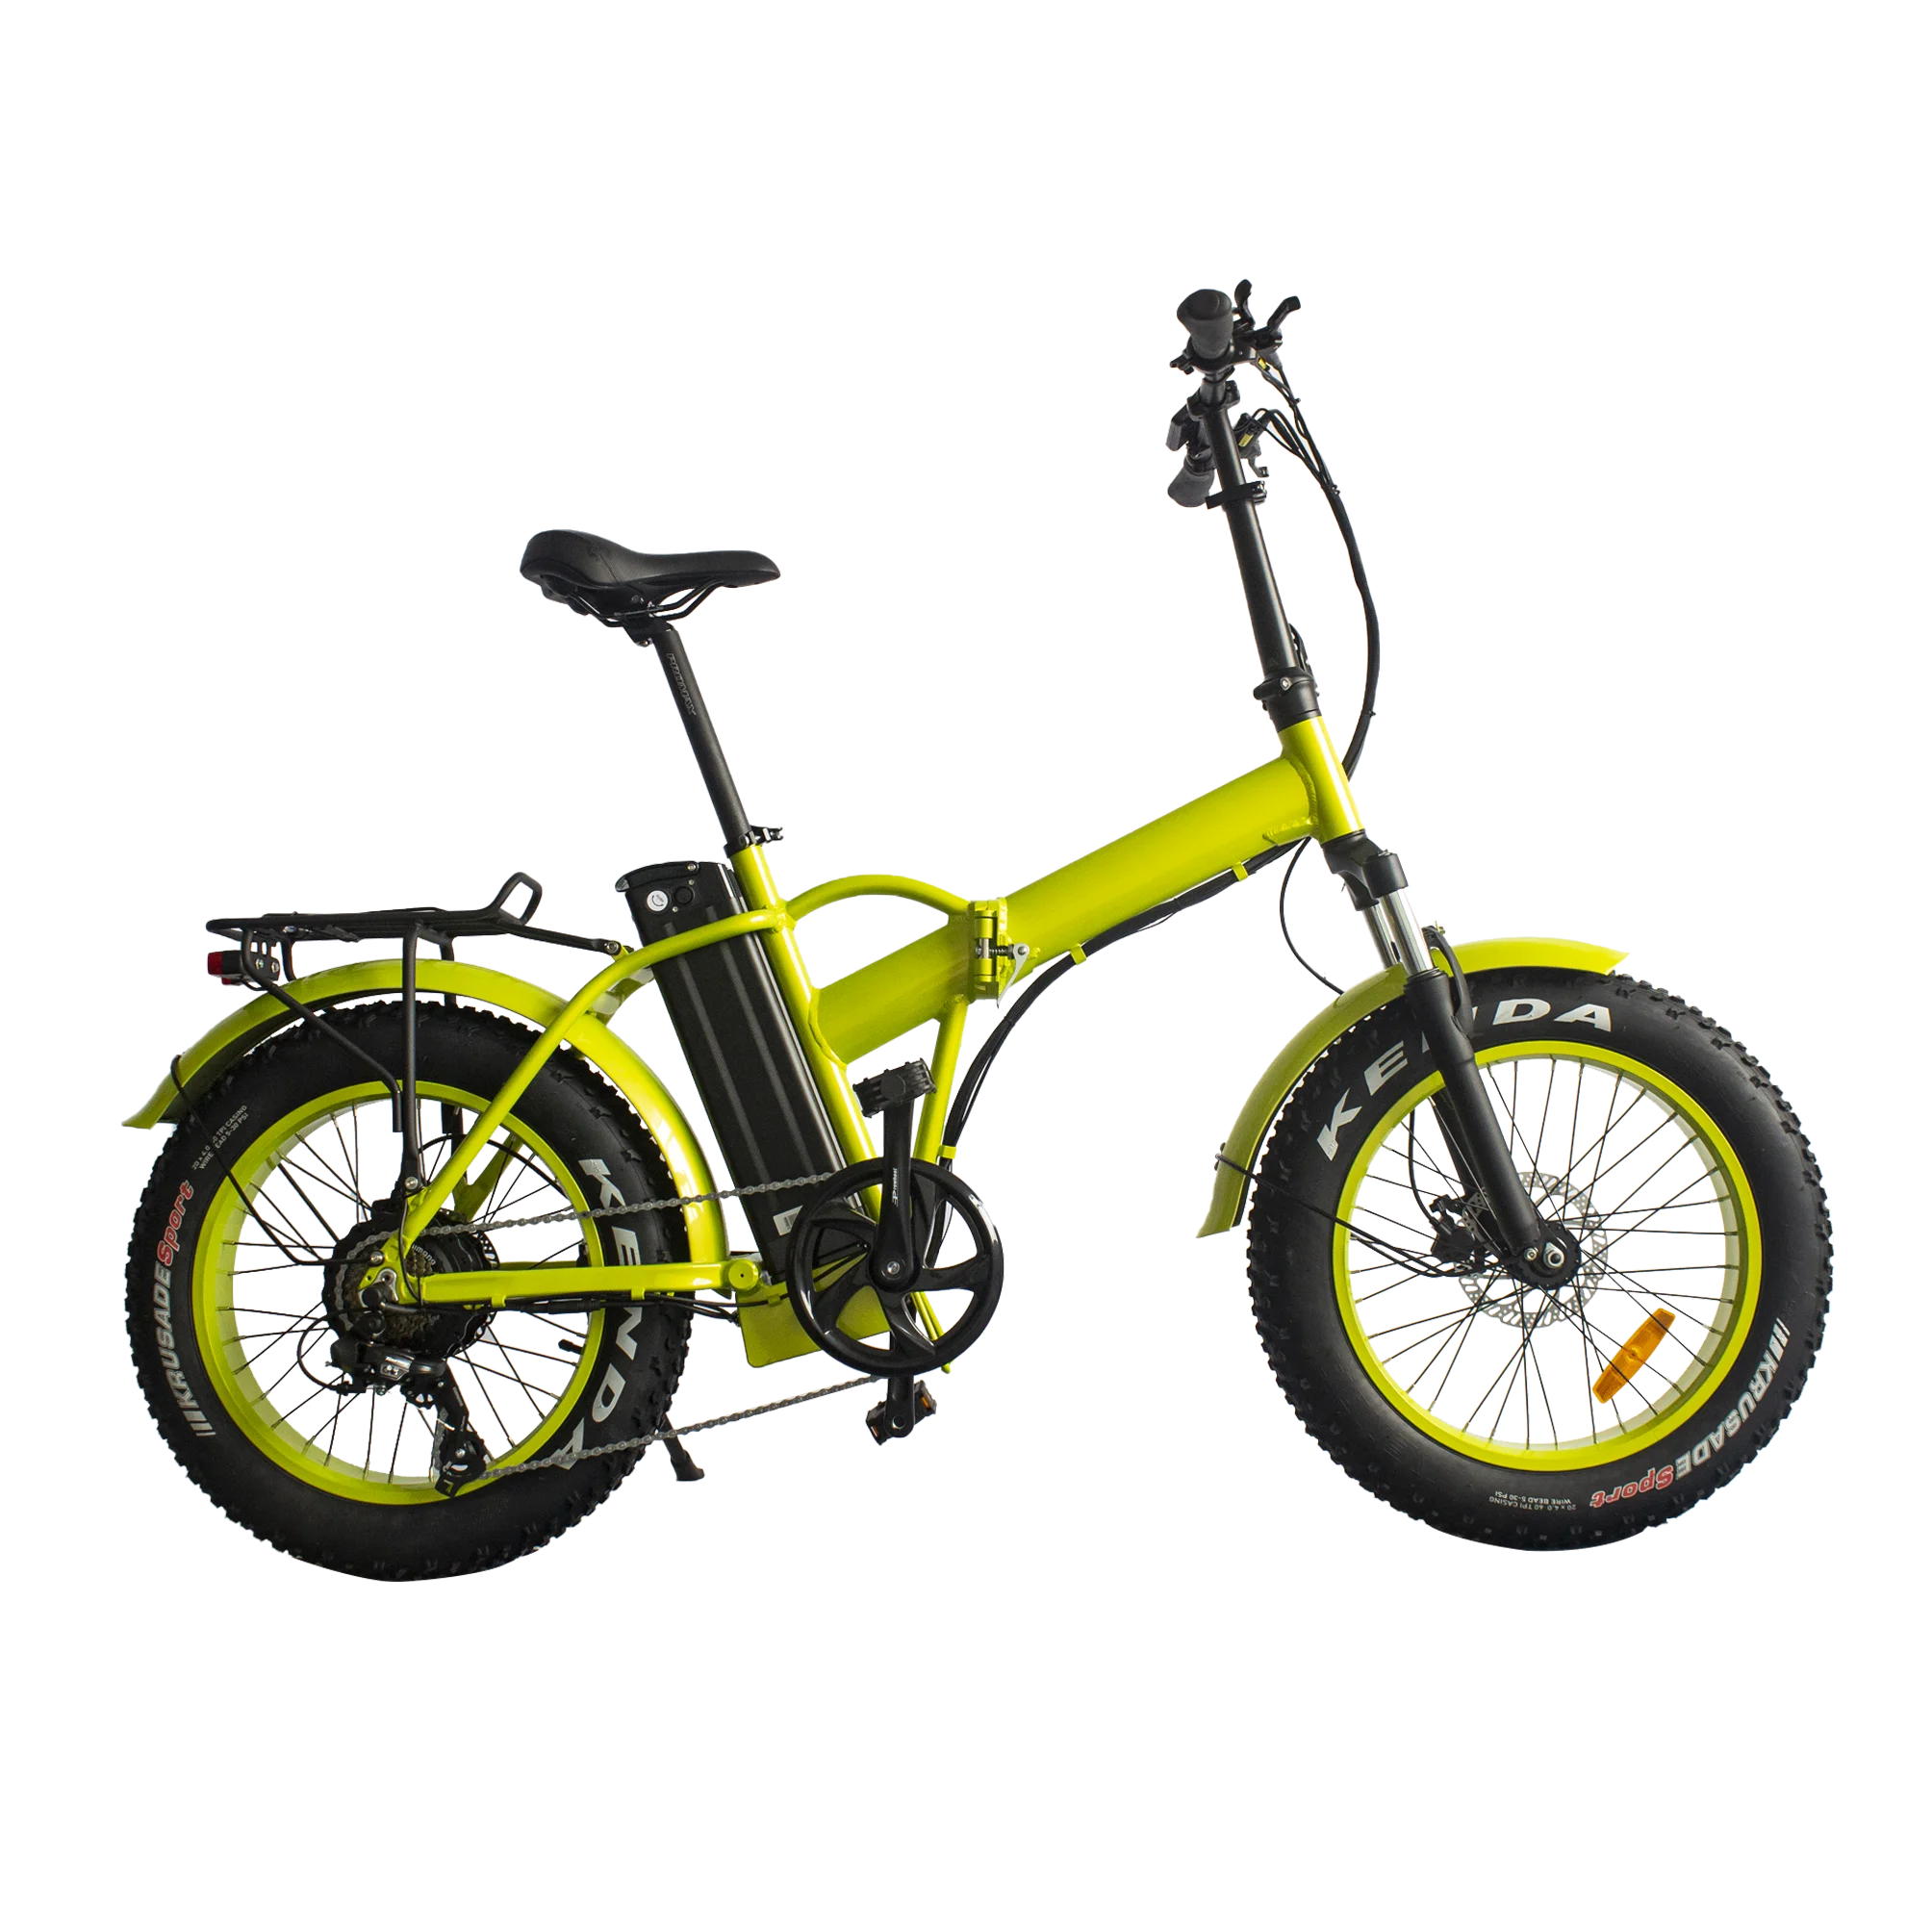 Made In China Low Price Sports Bike Electric Bicycle Adult Two Wheel Electric Bici Cruiser gp enterprises made thermoplastic material 115v 230v 1 2hp shallow well water jet pump at max 25ft depth in china factory price